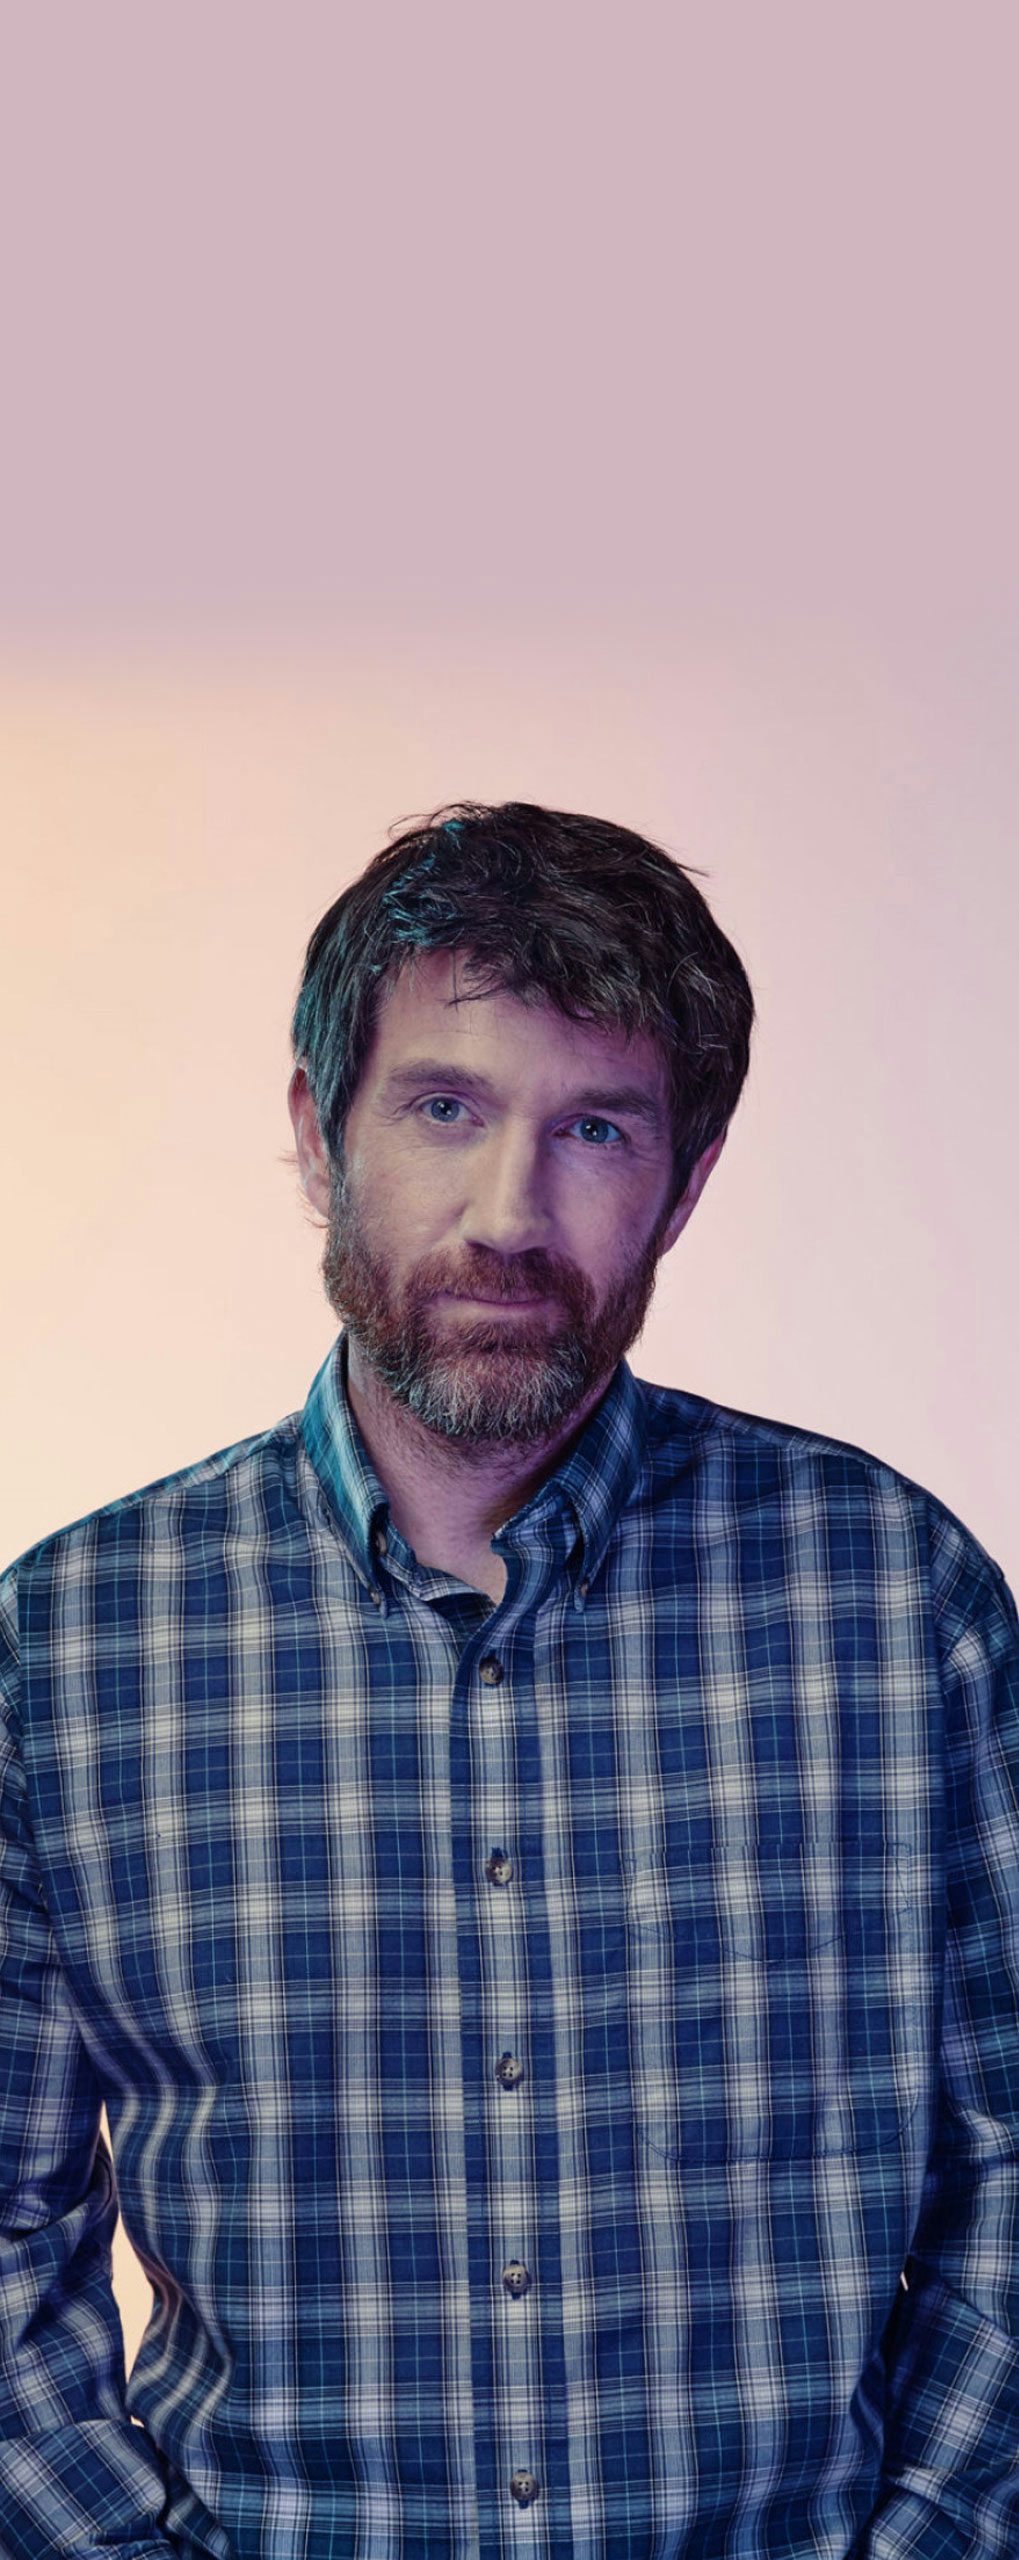 Man in plaid shirt standing with a light background behind him